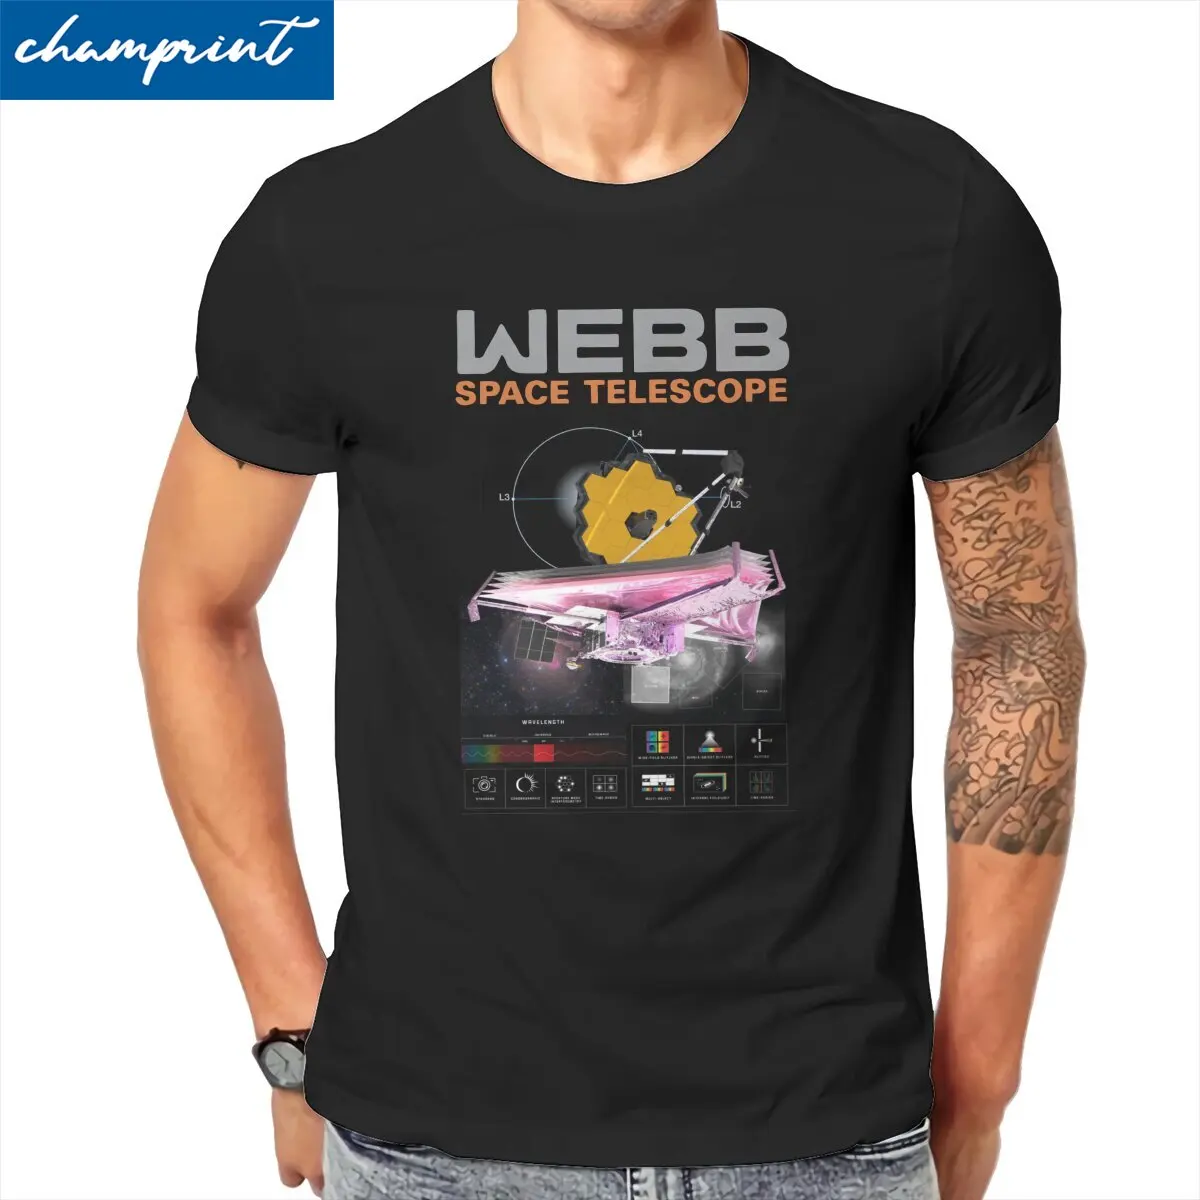 Awesome James Webb Space Telescope Launch  T-Shirt for Men O Neck Pure Cotton T Shirt  Short Sleeve Tees Plus Size Tops